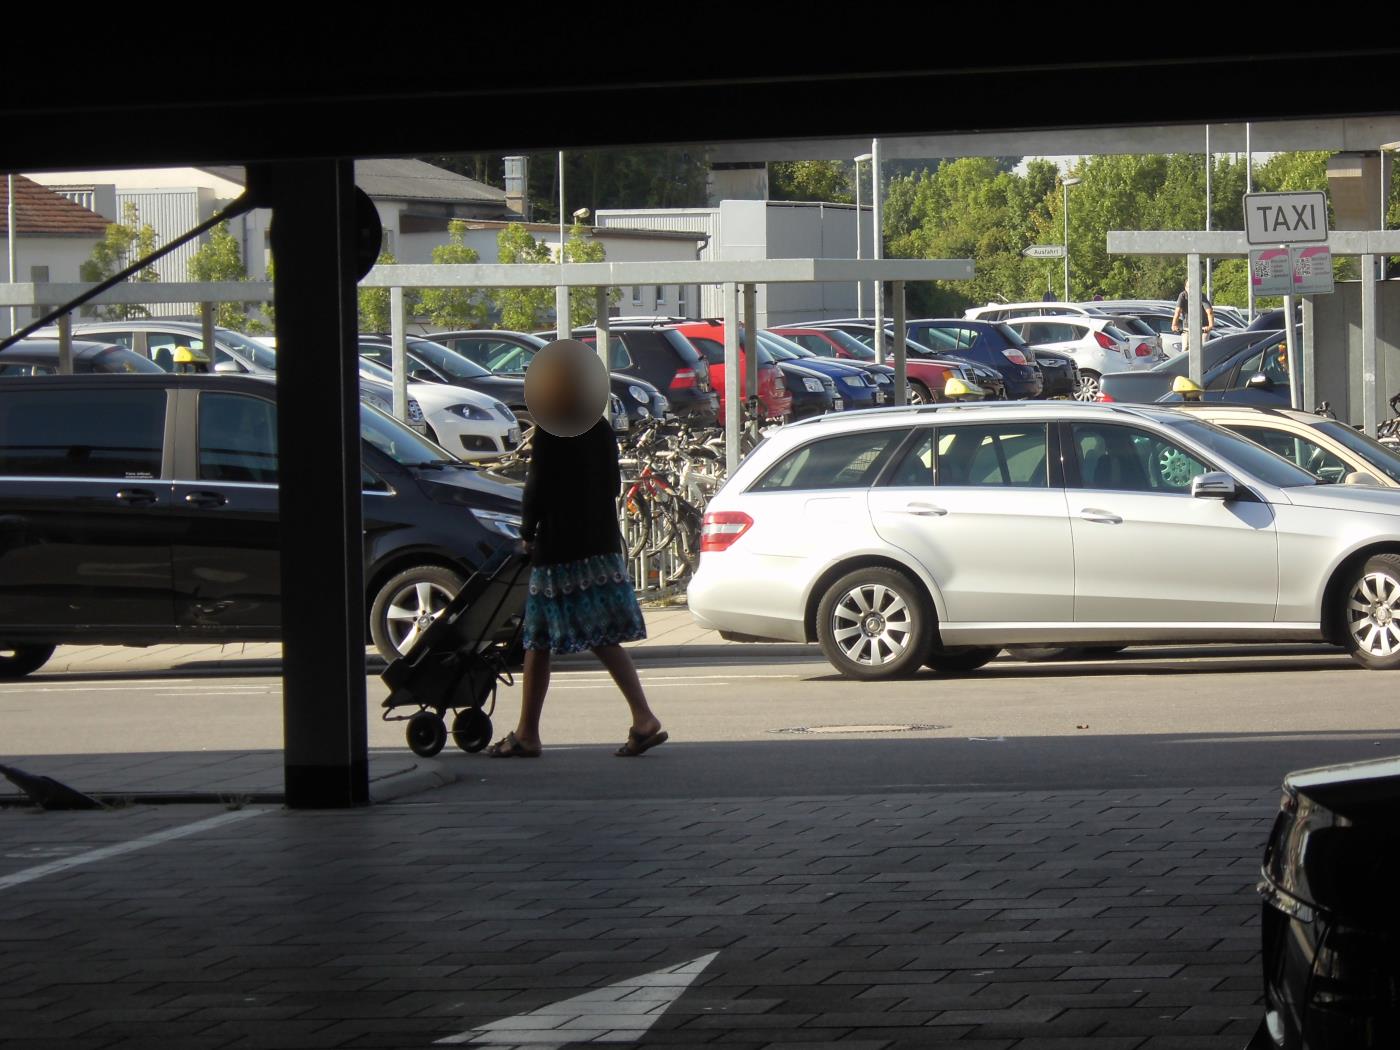 Jehovah's Witnesses at Walldorf-Wiesloch Station